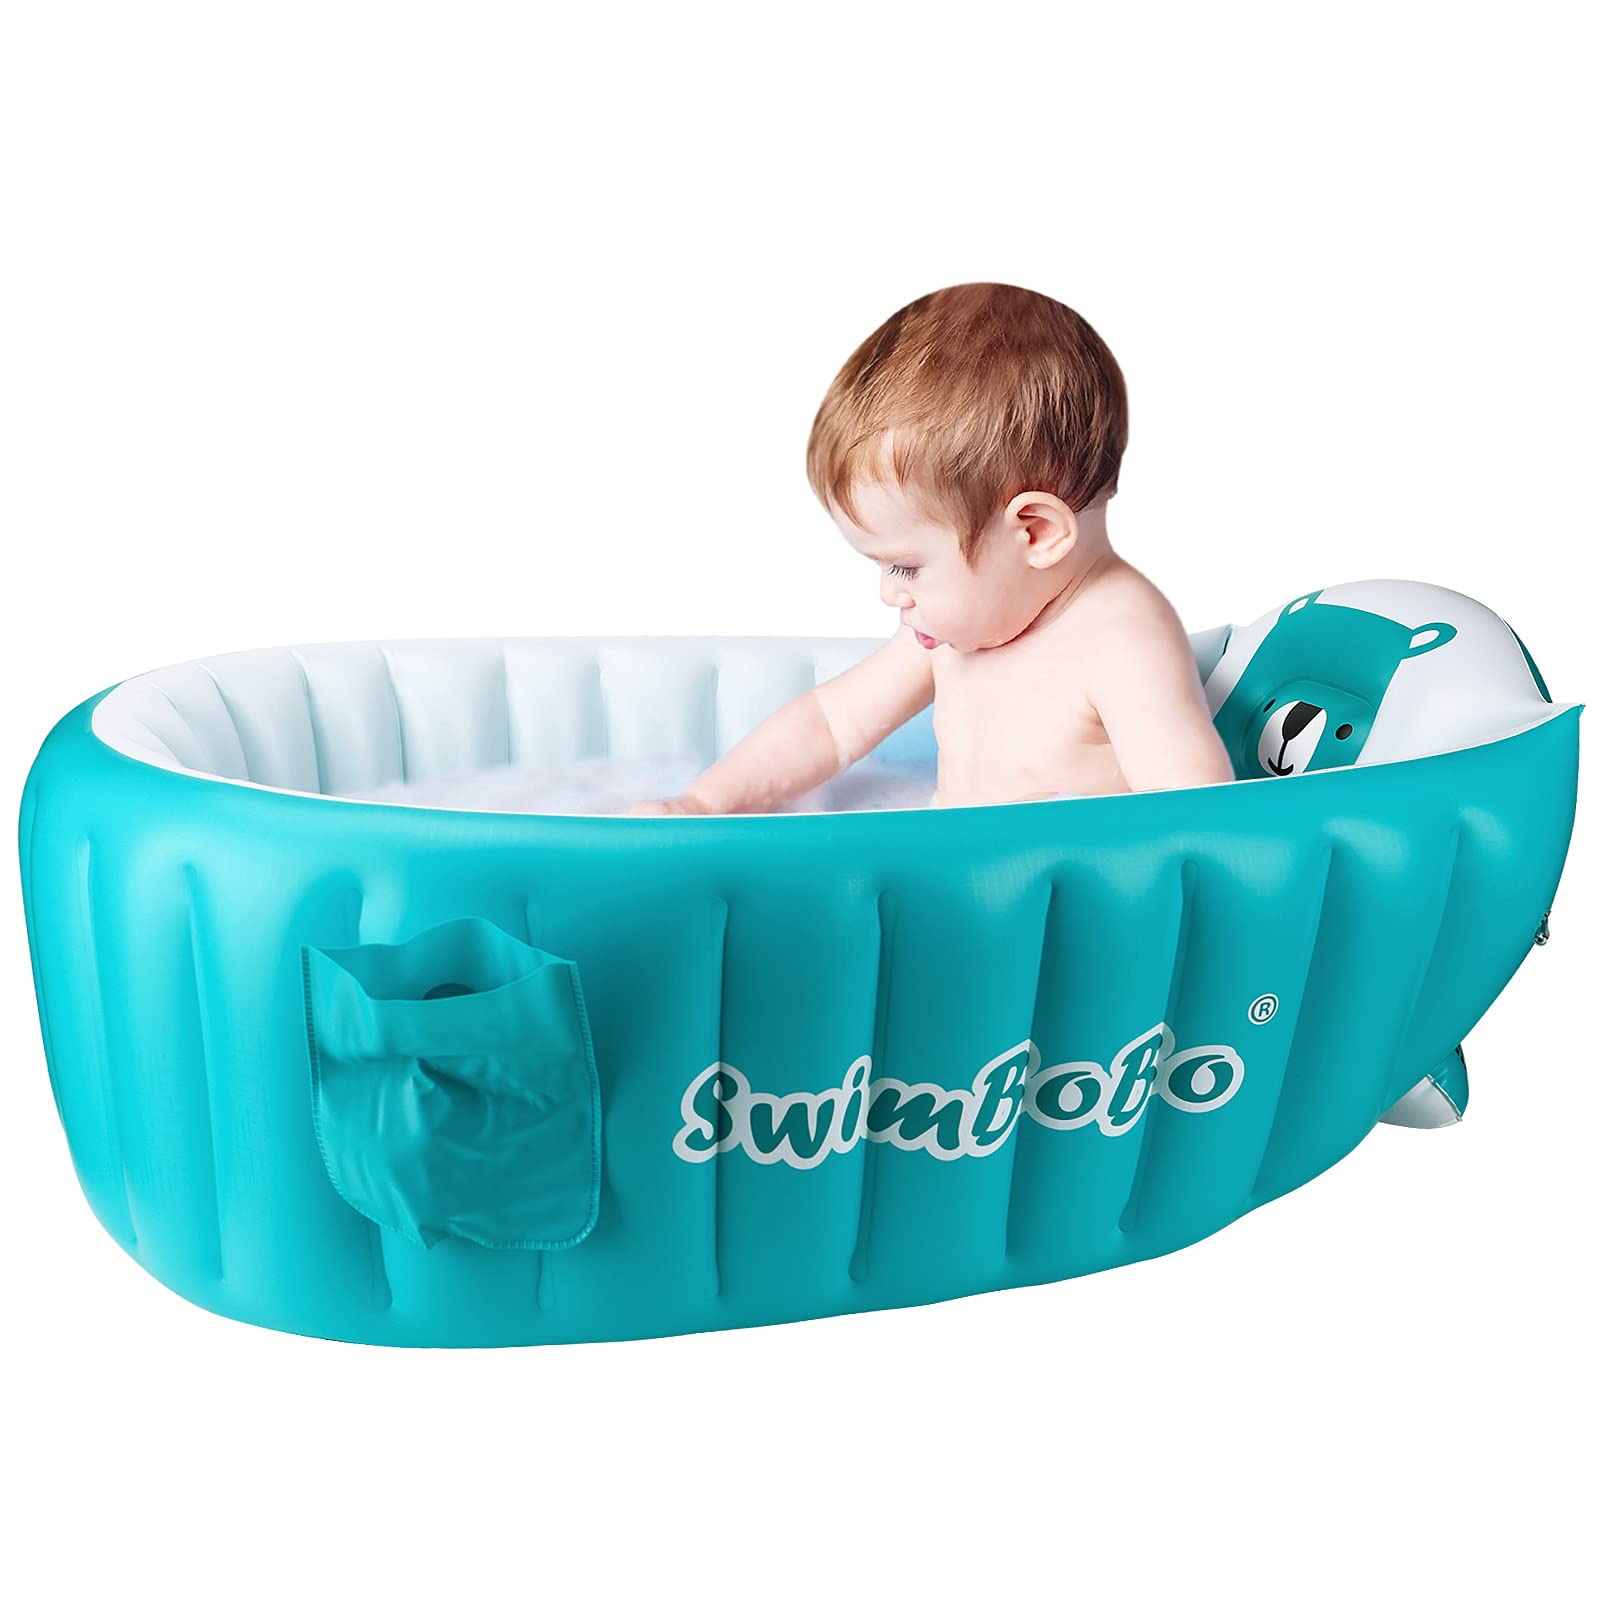 Inflatable Baby Bath Tub Portable Foldable Travel Mini Swimming Pool Helps Infants to Toddler Tub (Blue)